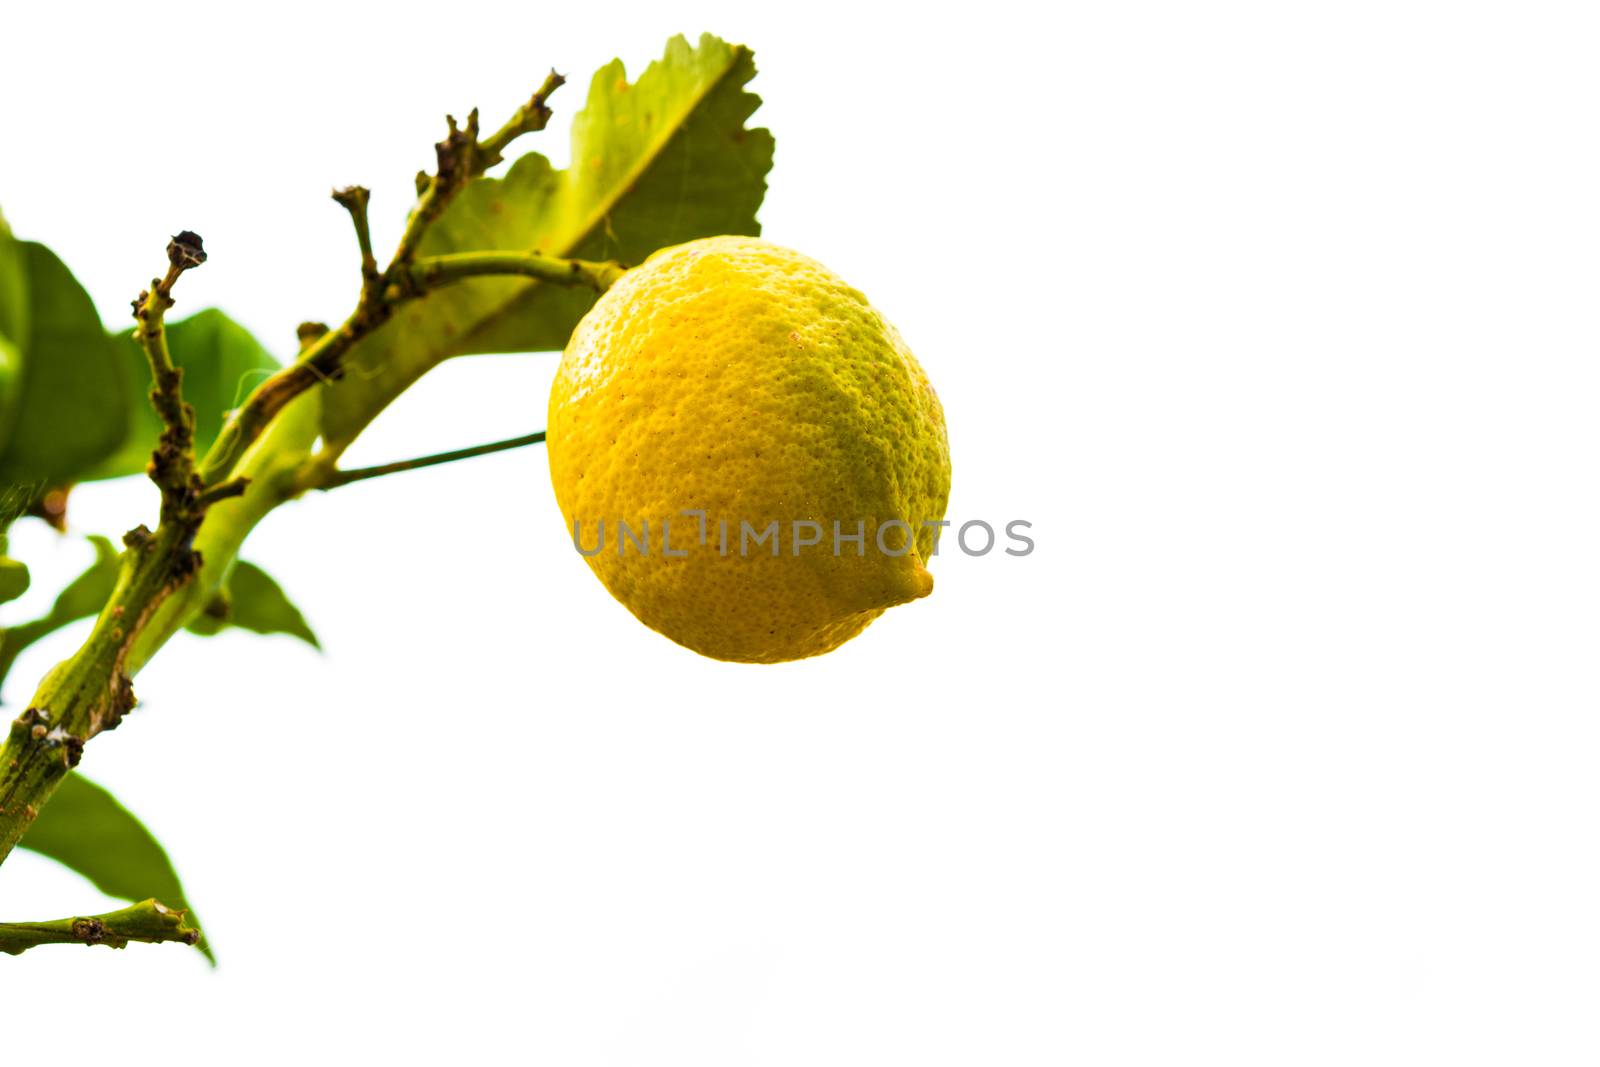 Branch of lemon tree isolated on white background. Copyspace. by chandlervid85